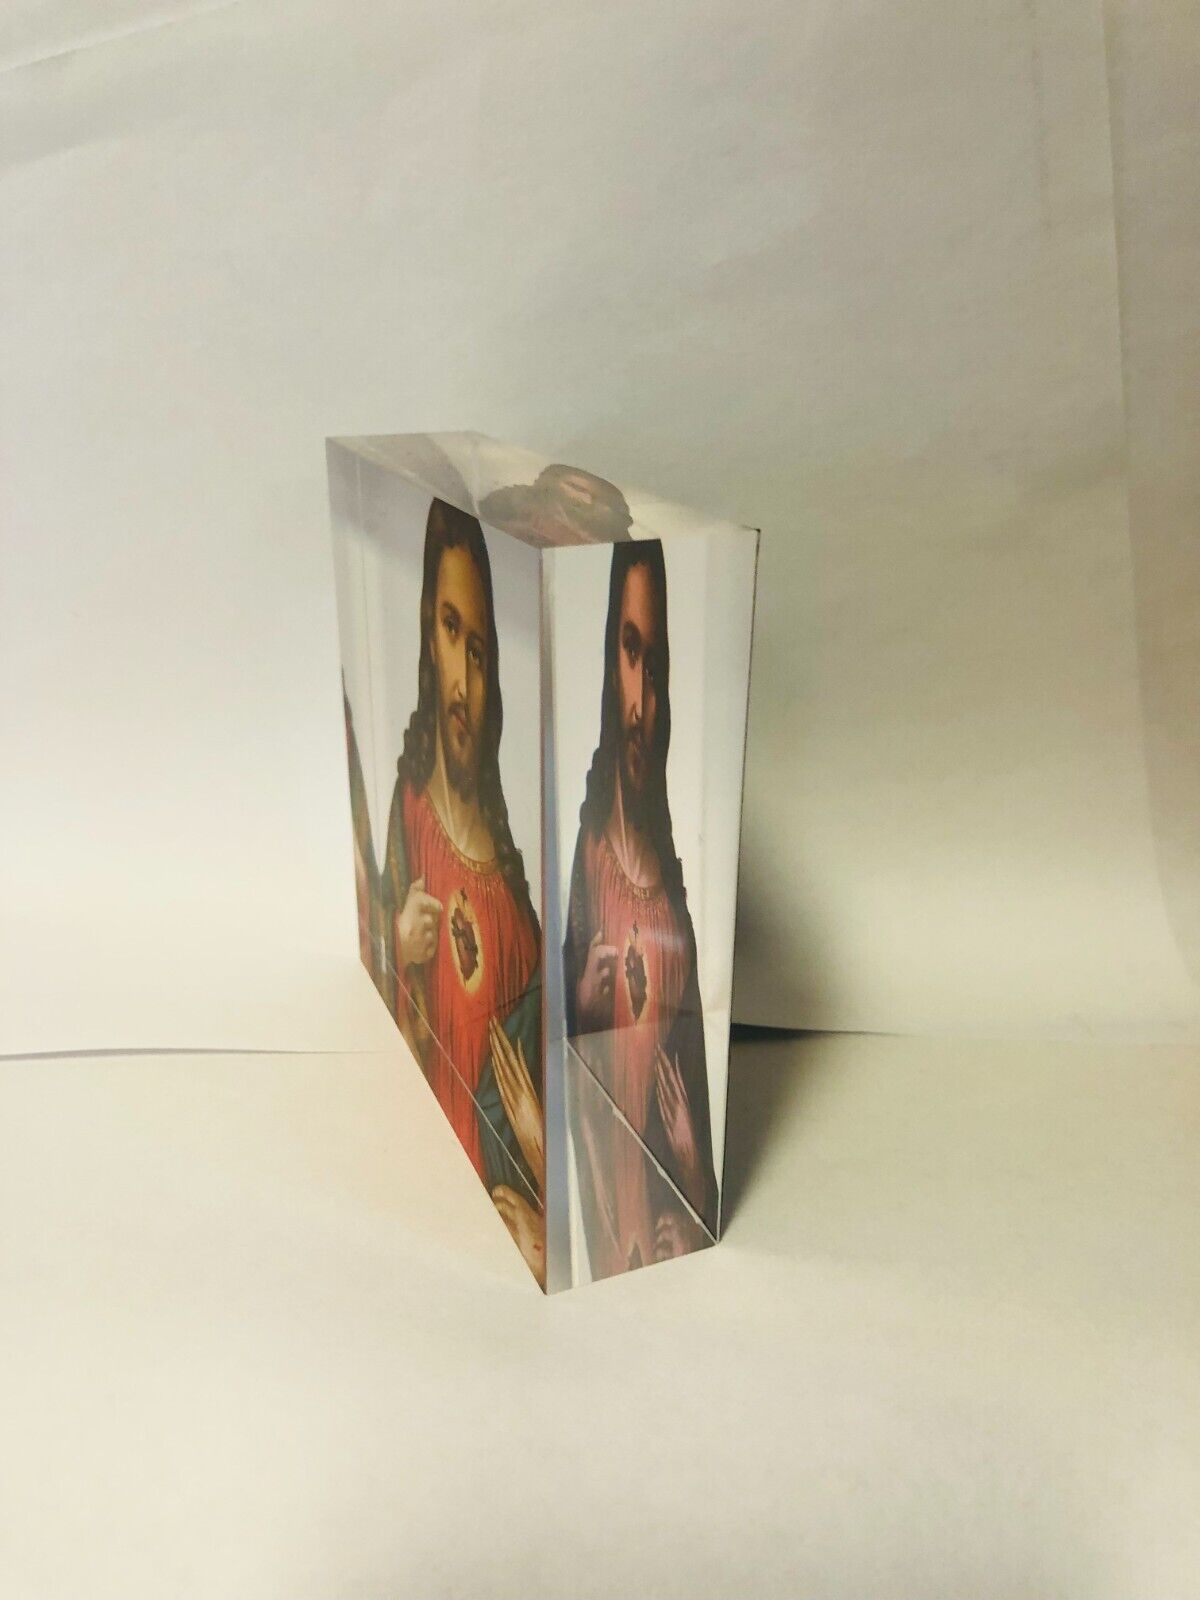 Sacred Heart of Jesus Acrylic Image Block, New - Bob and Penny Lord